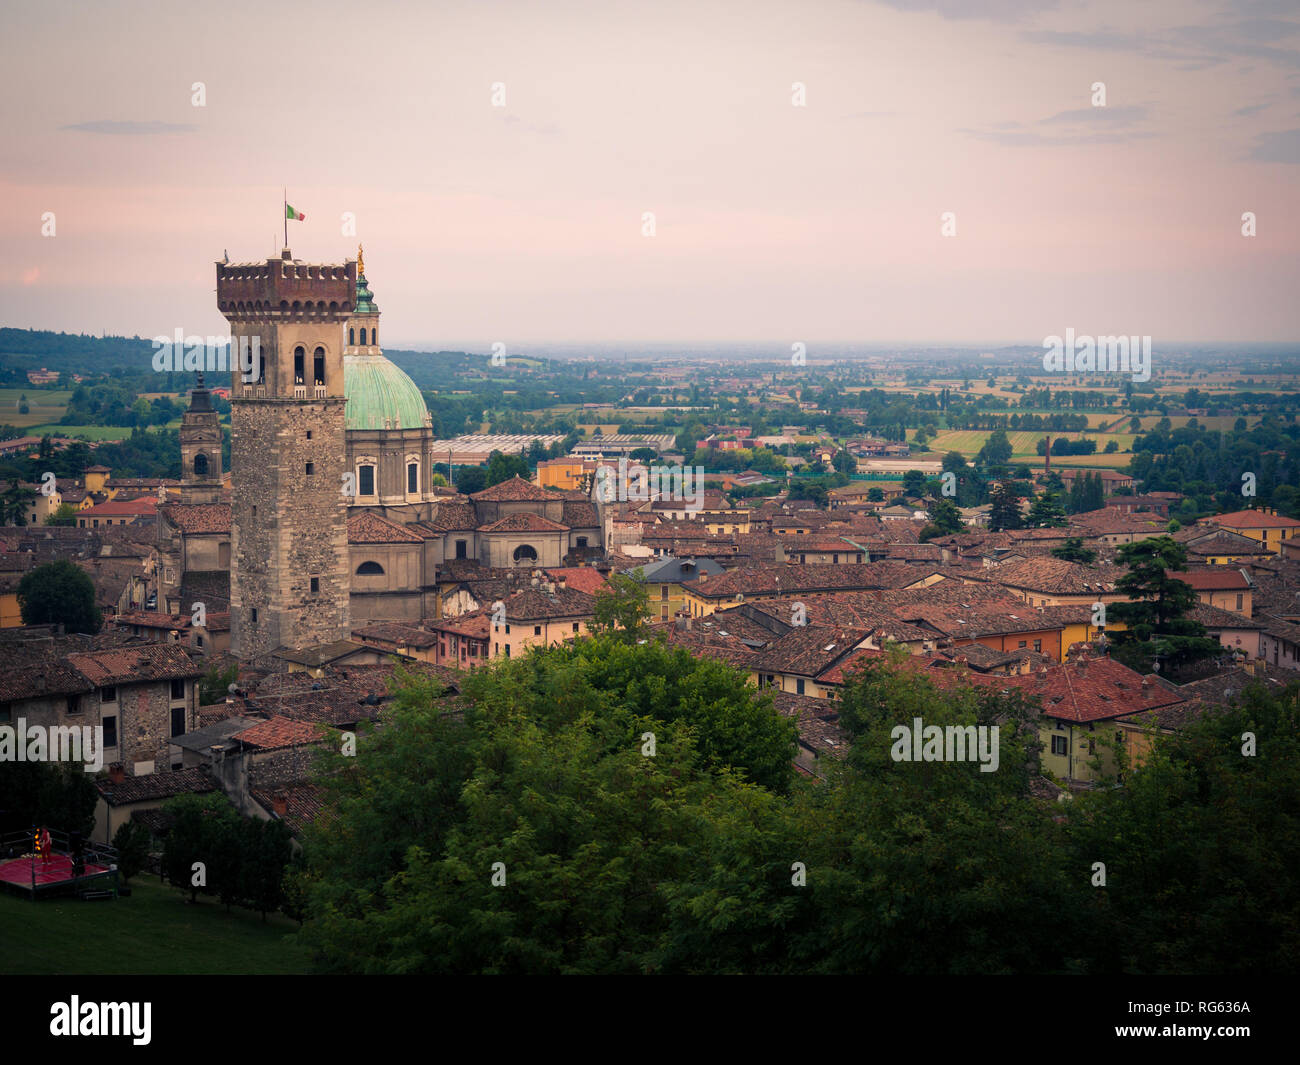 View of the medieval tower and the dome of the Cathedral in Lonato, Italy. Stock Photo